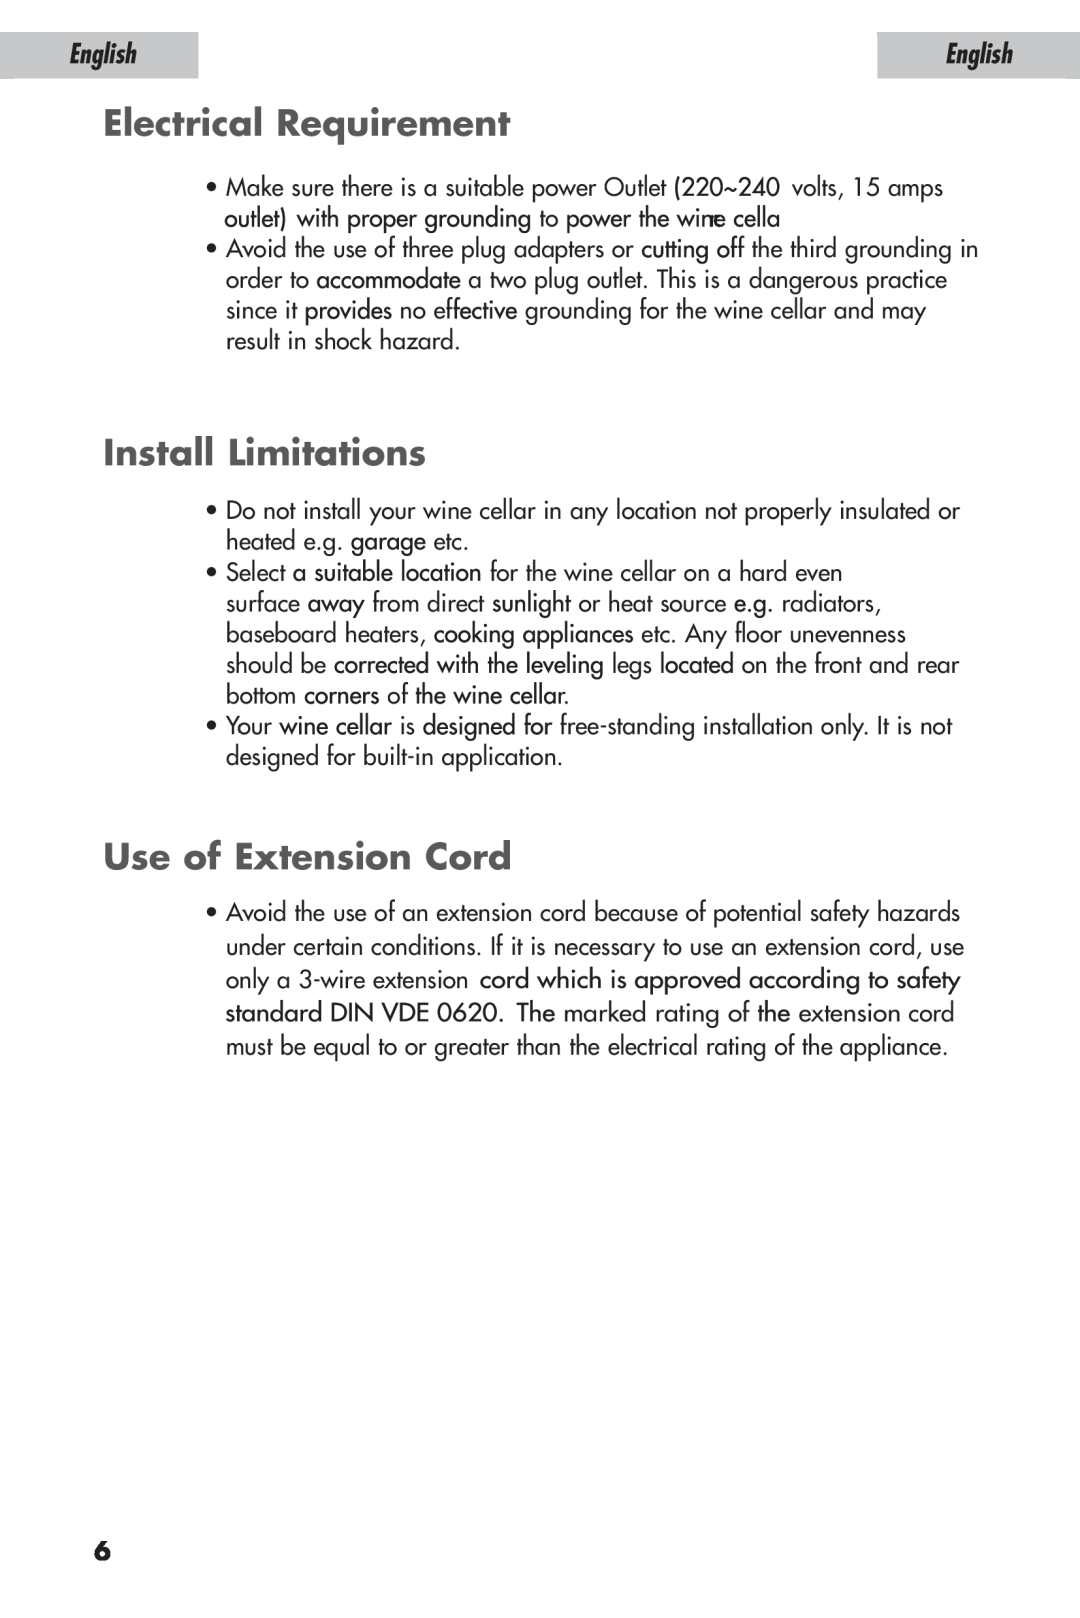 Haier JC-110GD user manual Electrical Requirement, Install Limitations, Use of Extension Cord, English 